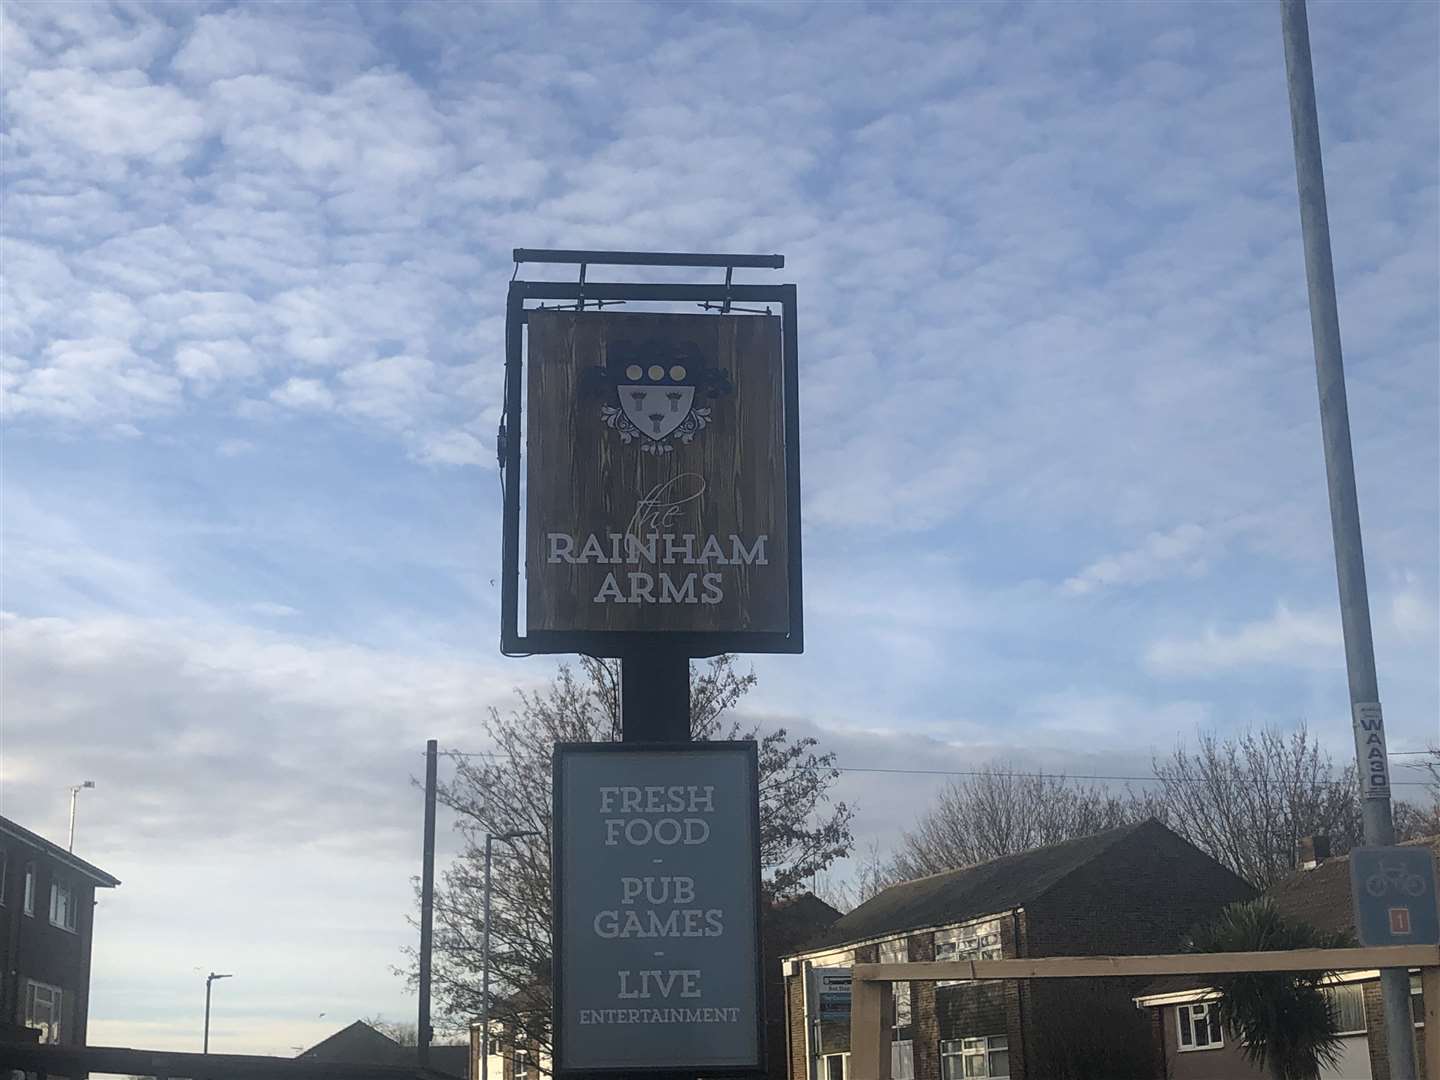 The old Concorde pub has changed its name to The Rainham Arms